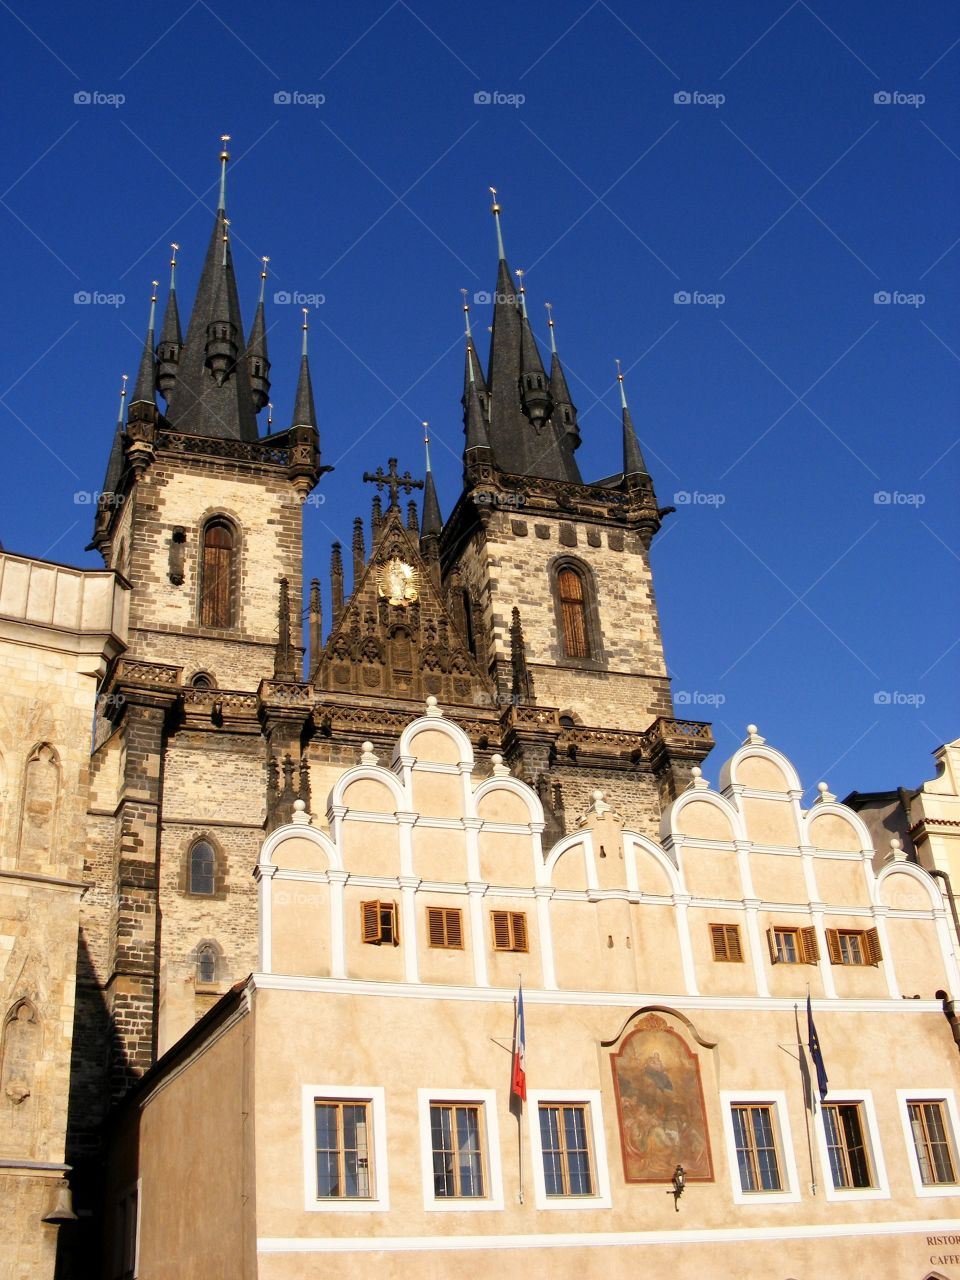 View of the Church Of Our Lady In Front Of Tyn. Old Town Square in Prague, Czech Republic